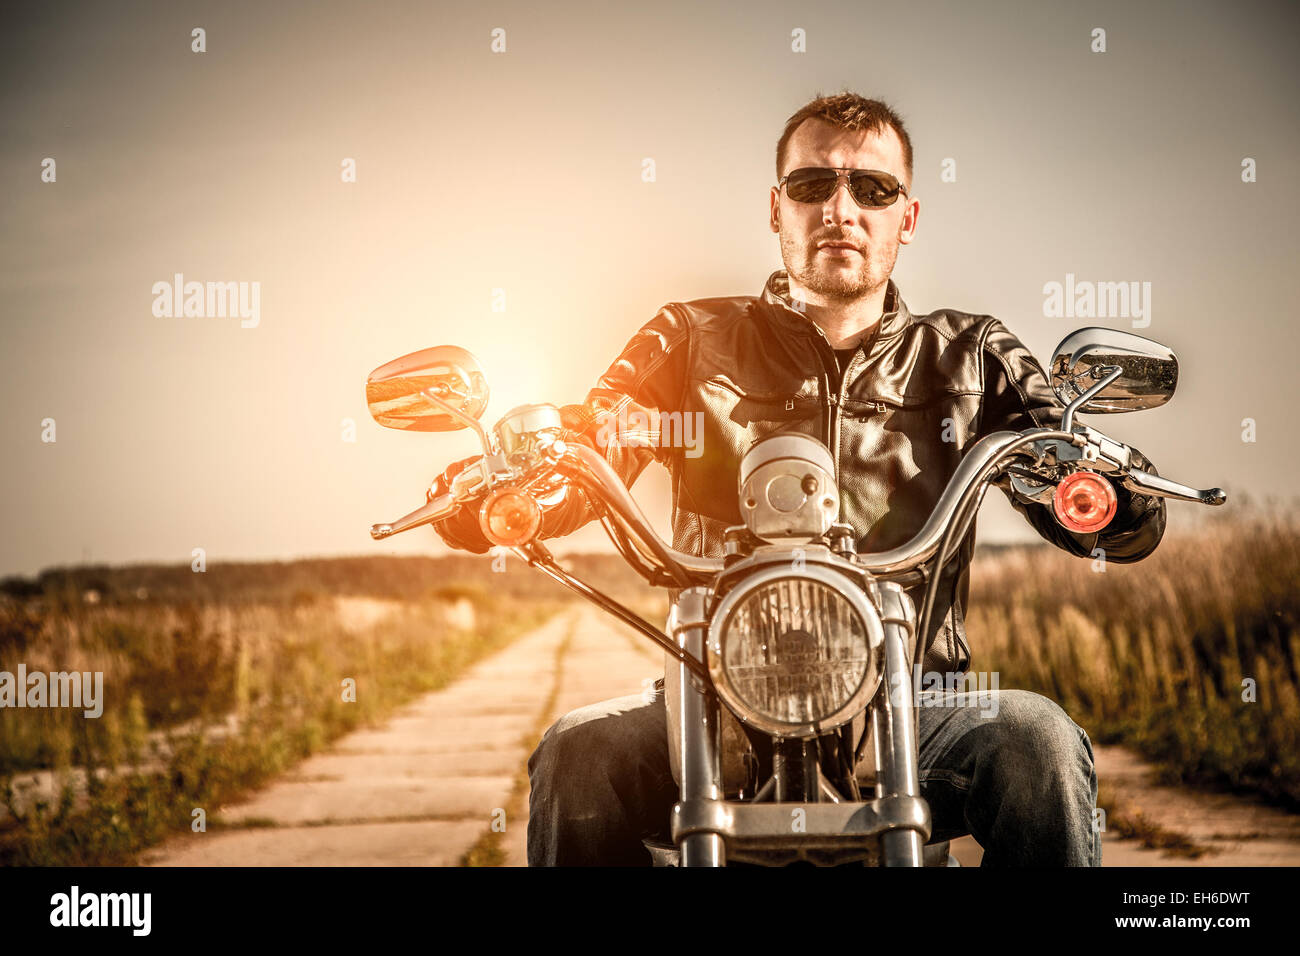 Biker man wearing a leather jacket and sunglasses sitting on his motorcycle looking at the sunset. Stock Photo